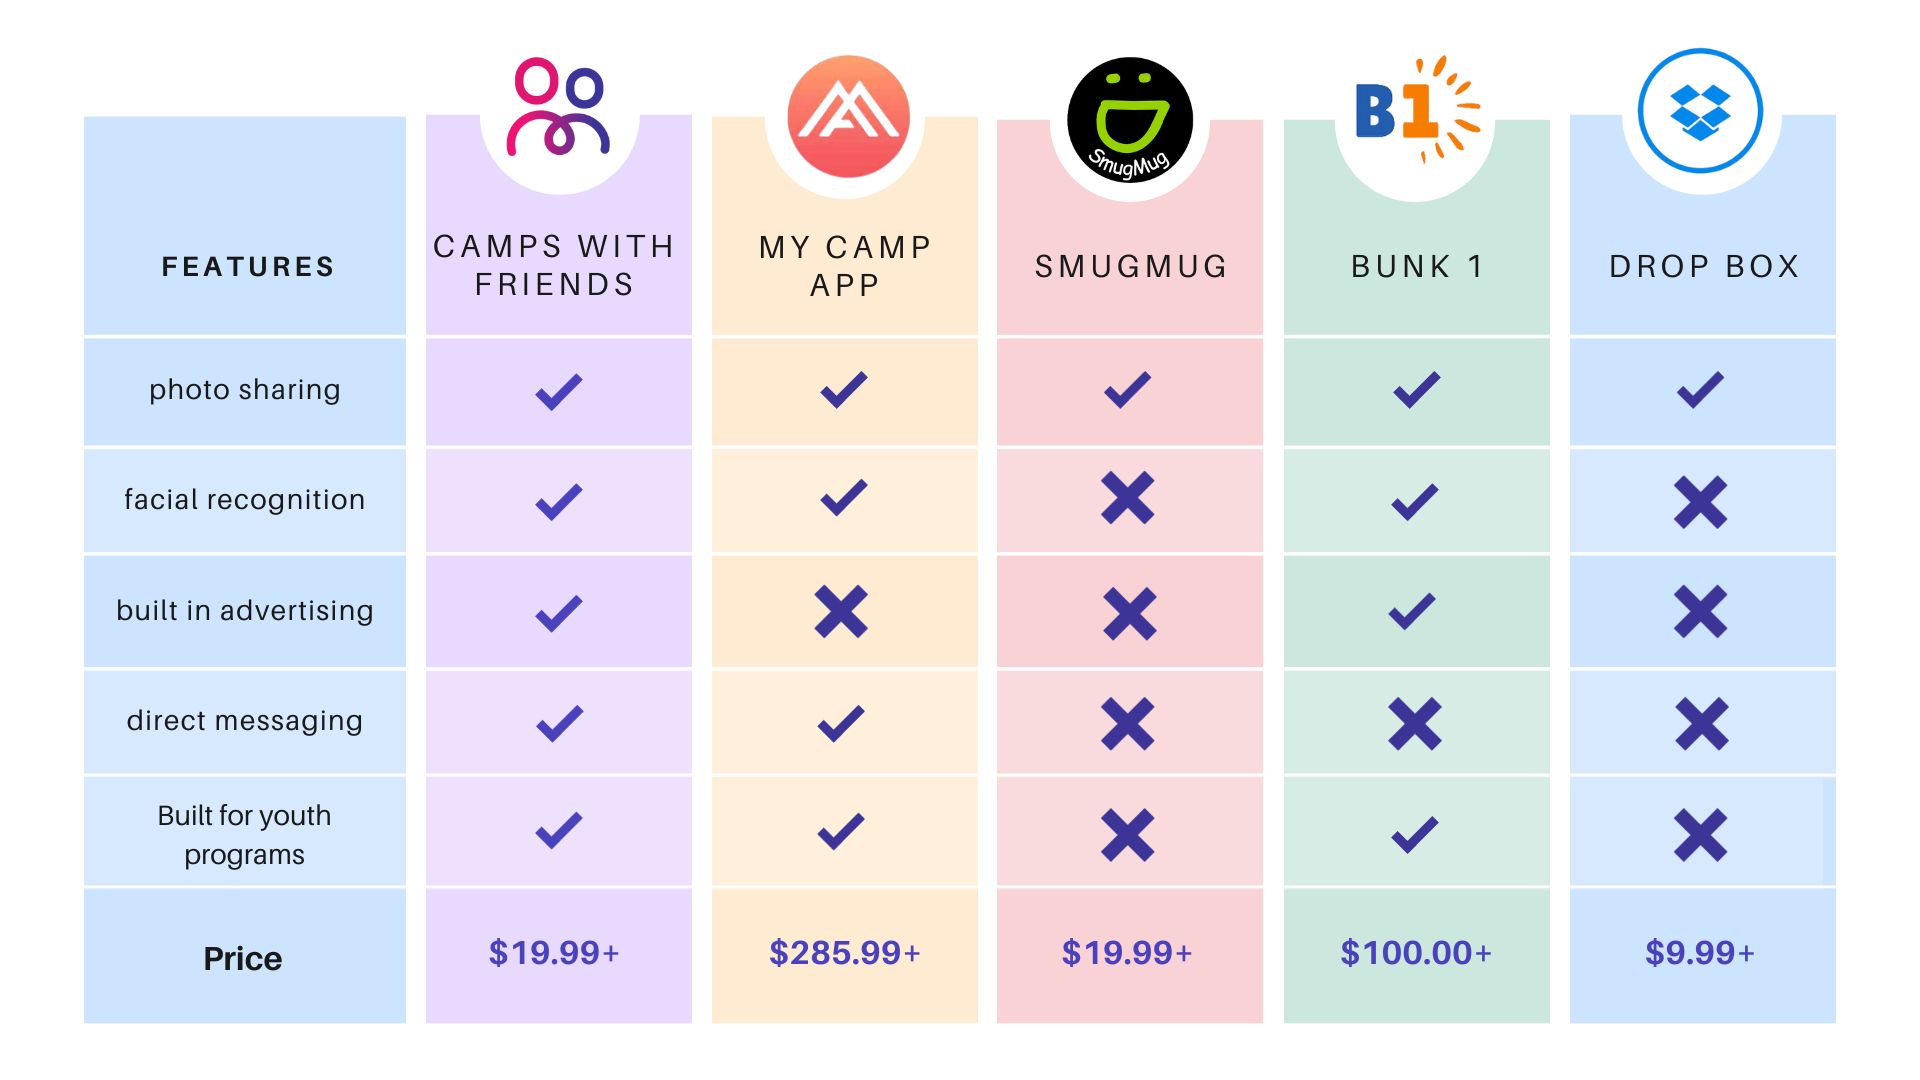 Camps with friends features comparison sheet